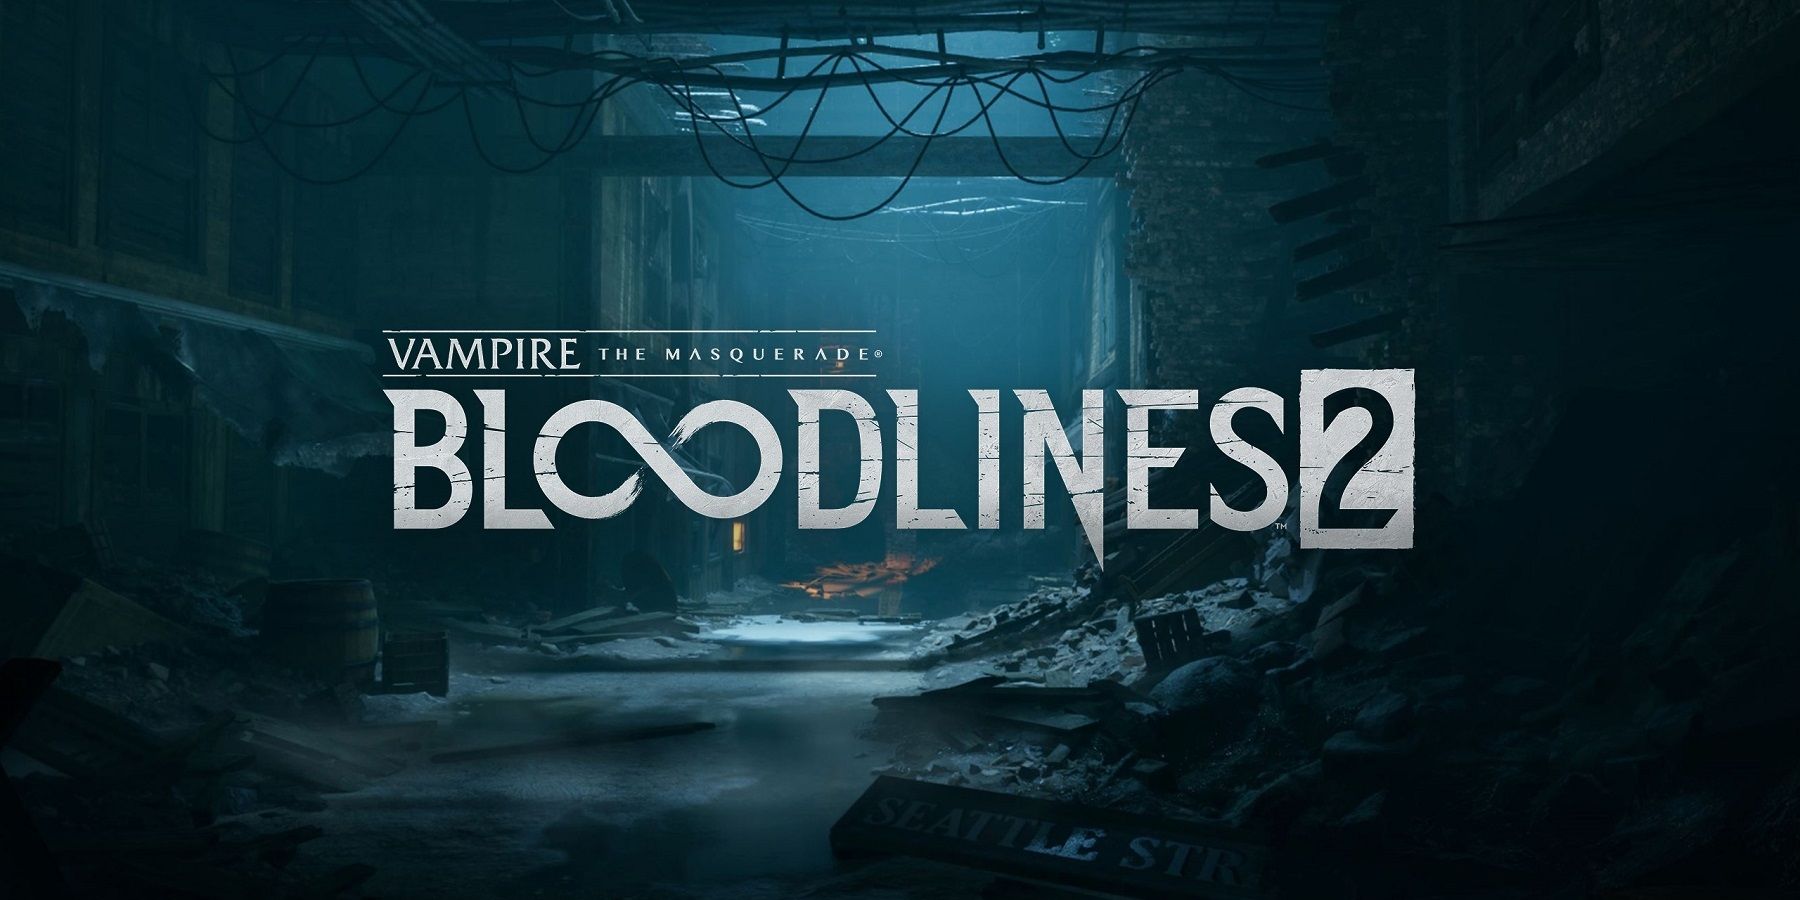 Vampire the Masquerade Bloodlines 2, Dead Before Arrival